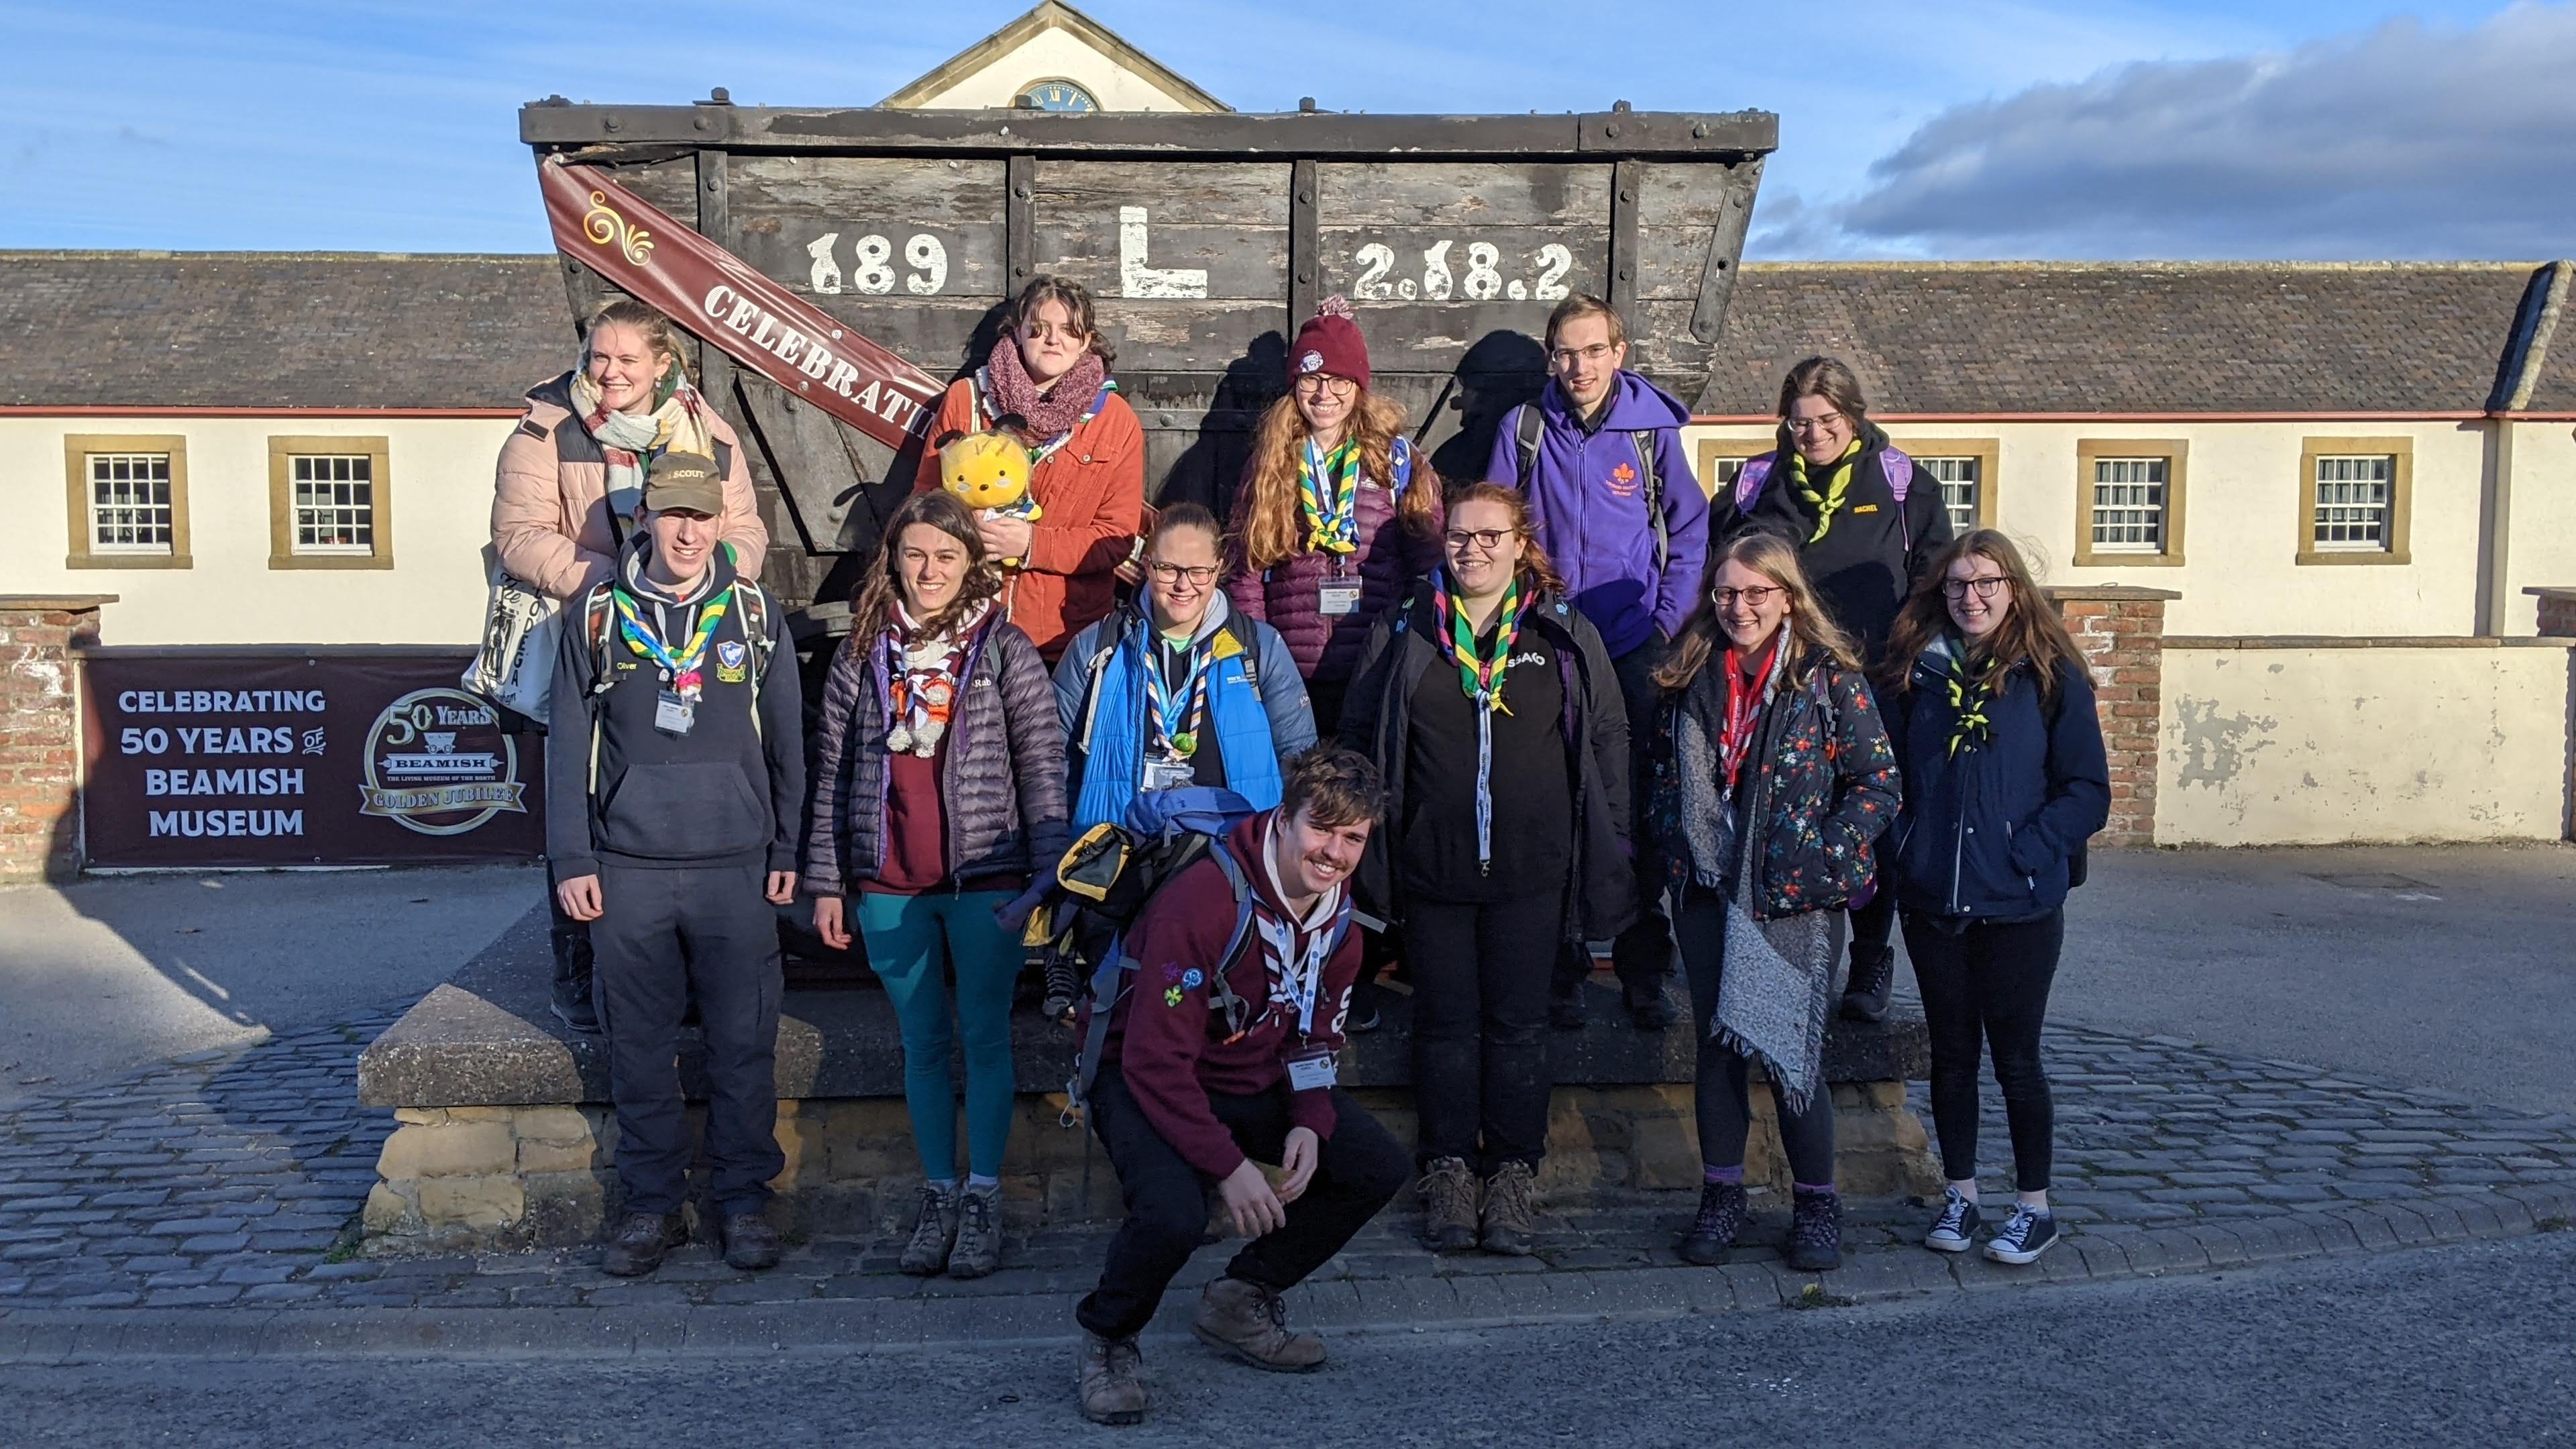 Group photo of those on the Beamish activity, in front of the entrance